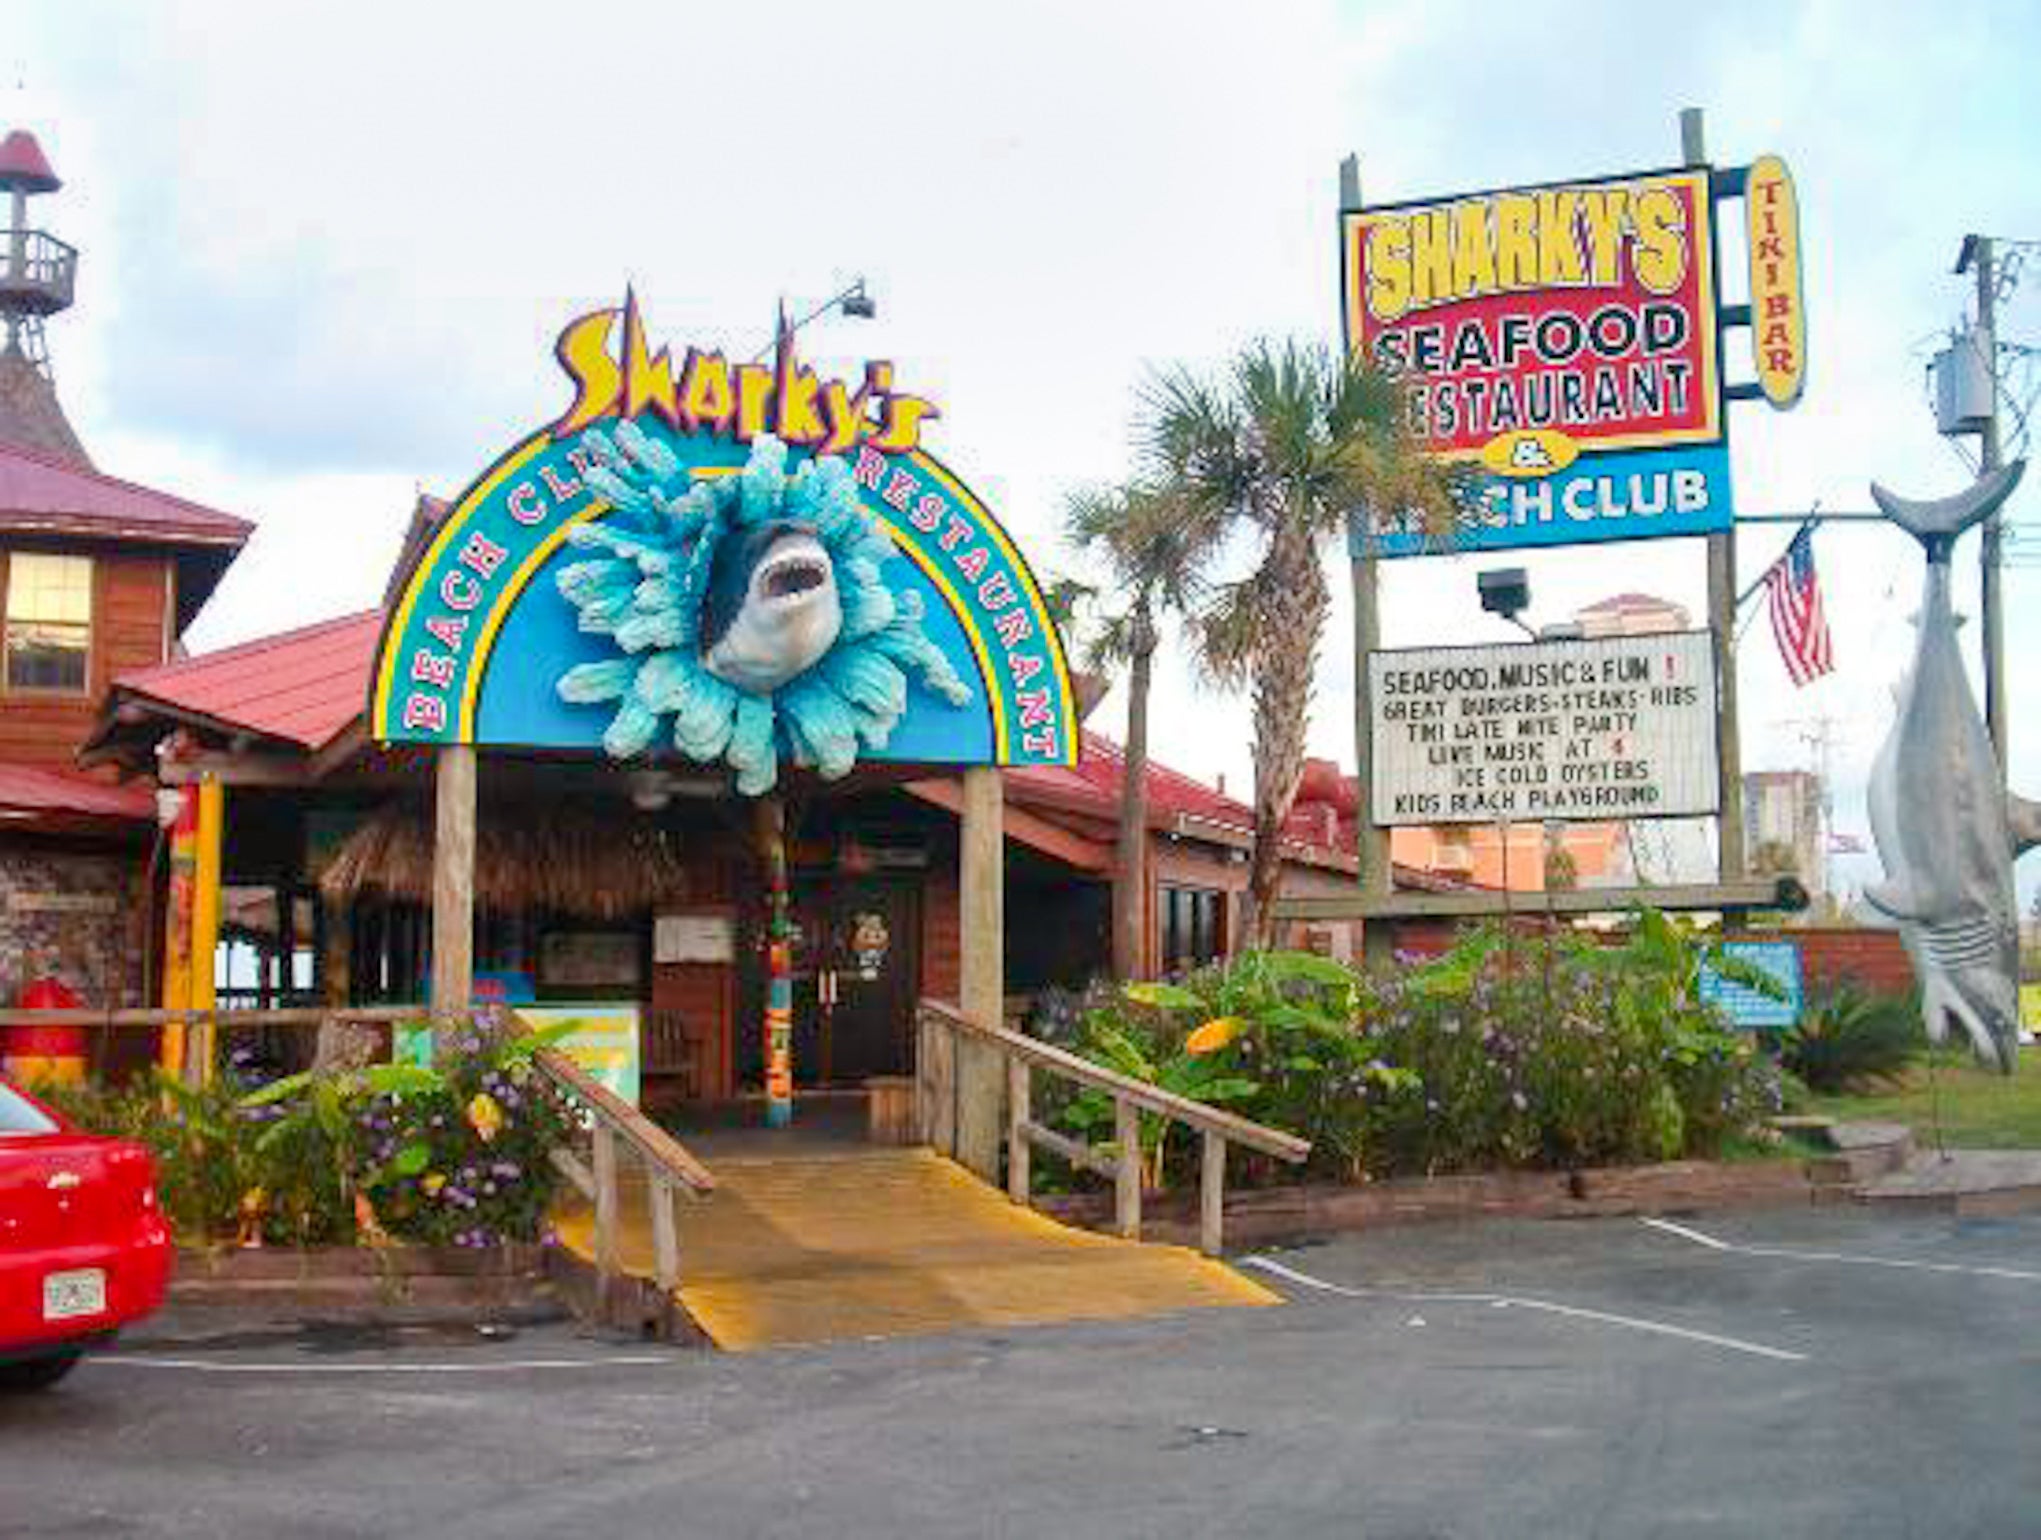 Sharky's for Seafood Music and Fun